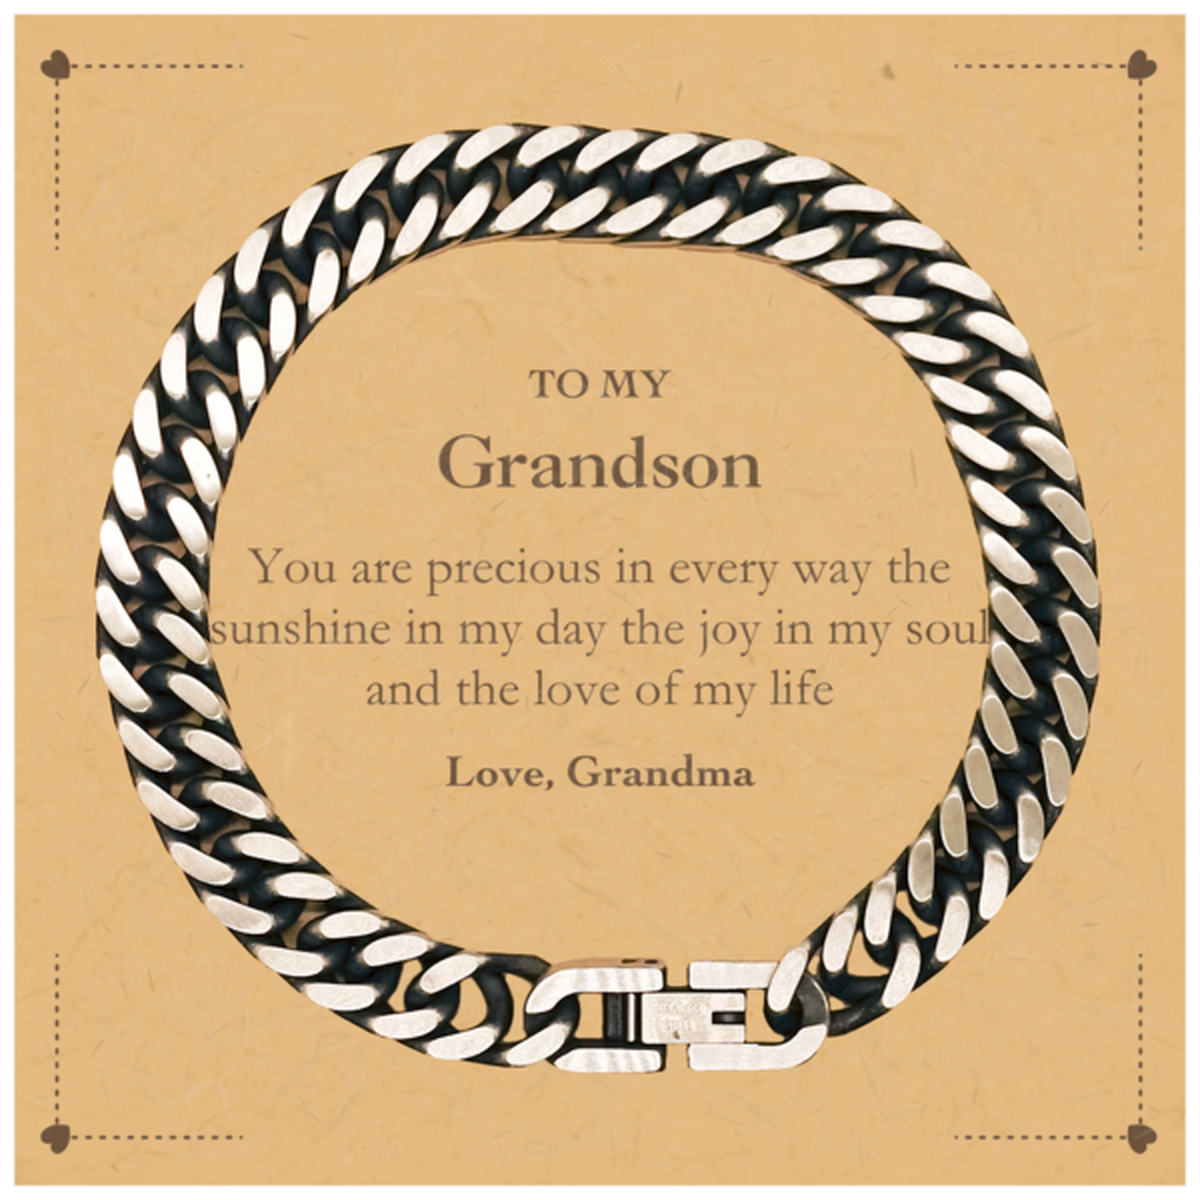 Graduation Gifts for Grandson Cuban Link Chain Bracelet Present from Grandma, Christmas Grandson Birthday Gifts Grandson You are precious in every way the sunshine in my day. Love, Grandma